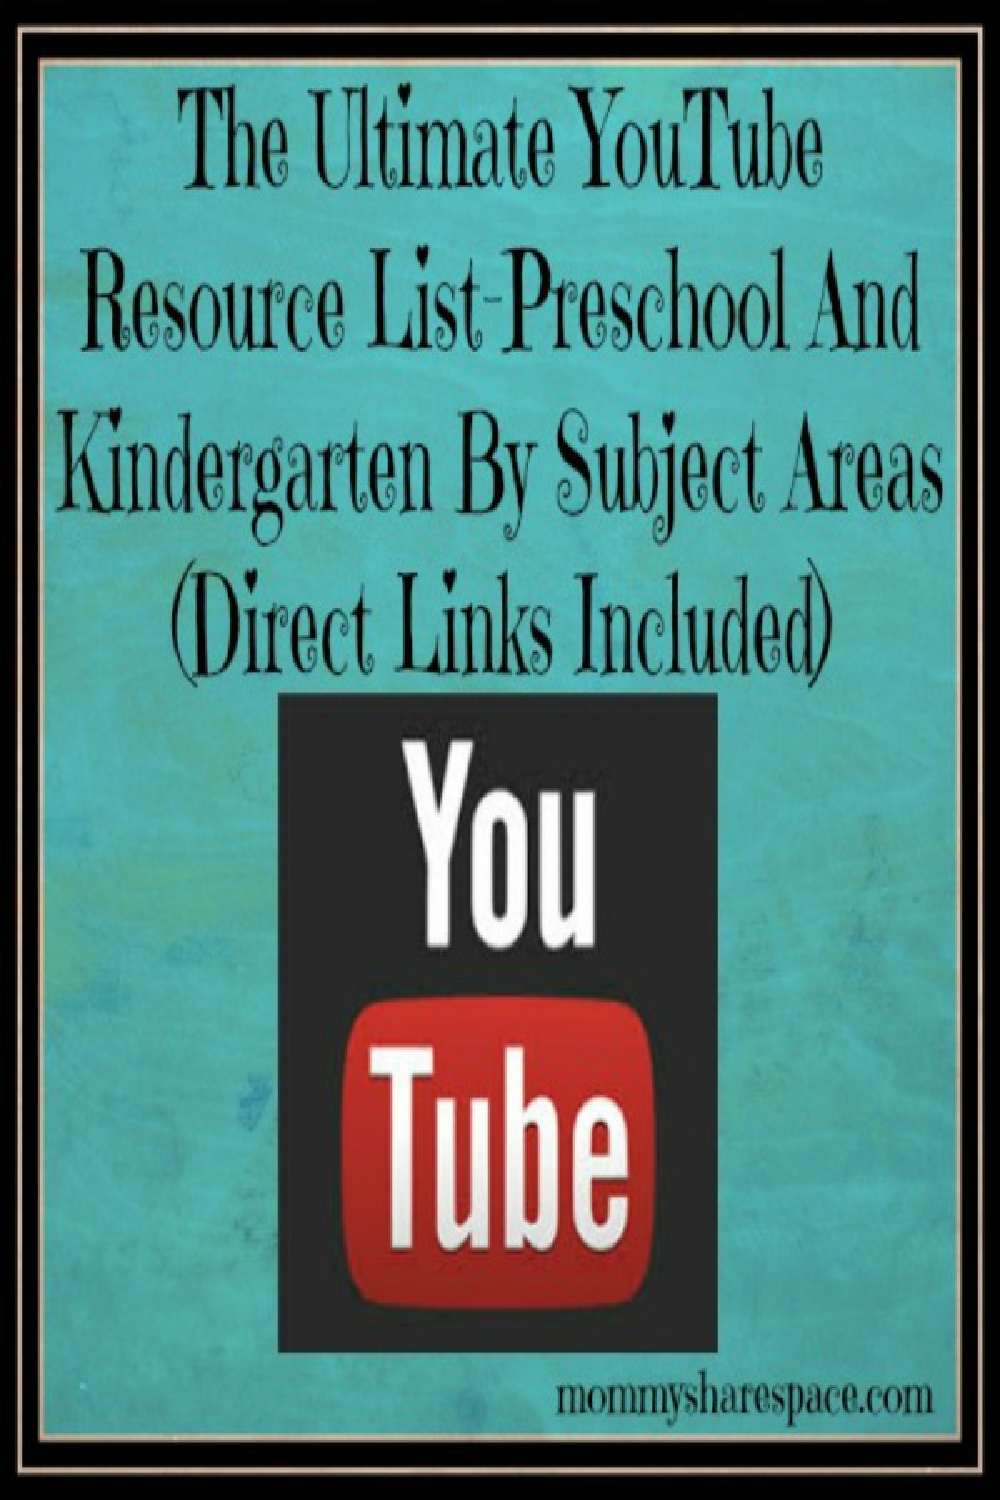 The Ultimate YouTube Resource List-Preschool And Kindergarten By Subject Areas